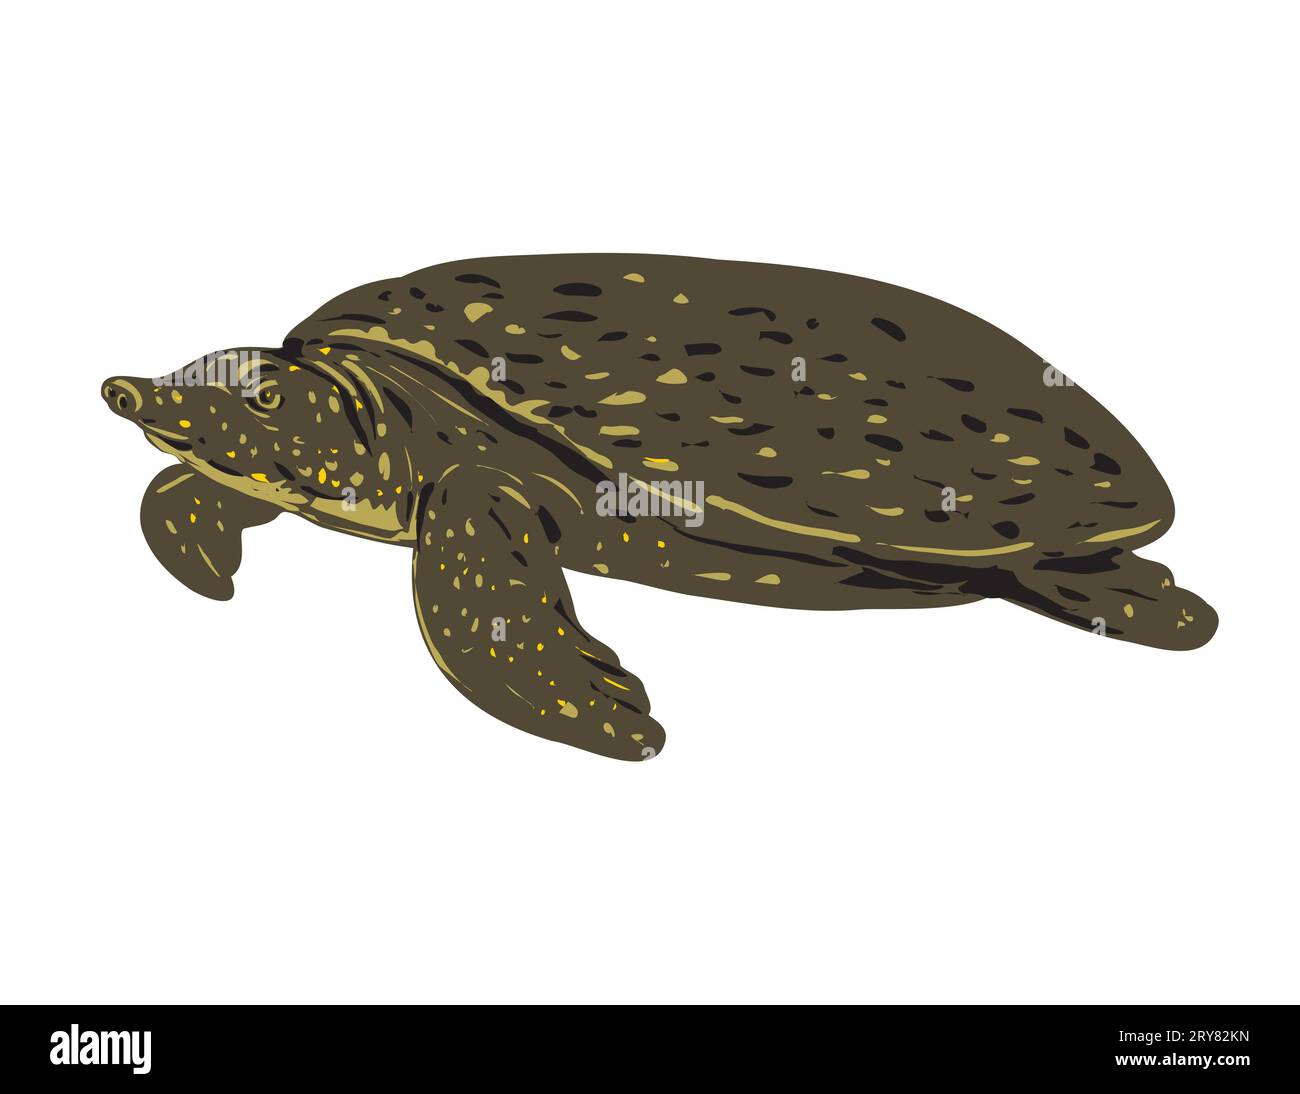 WPA poster art of an Asiatic softshell turtle, Southeast Asian softshell turtle,  Amyda ornata or black-rayed softshell turtle, Amyda cartilaginea don Stock Photo